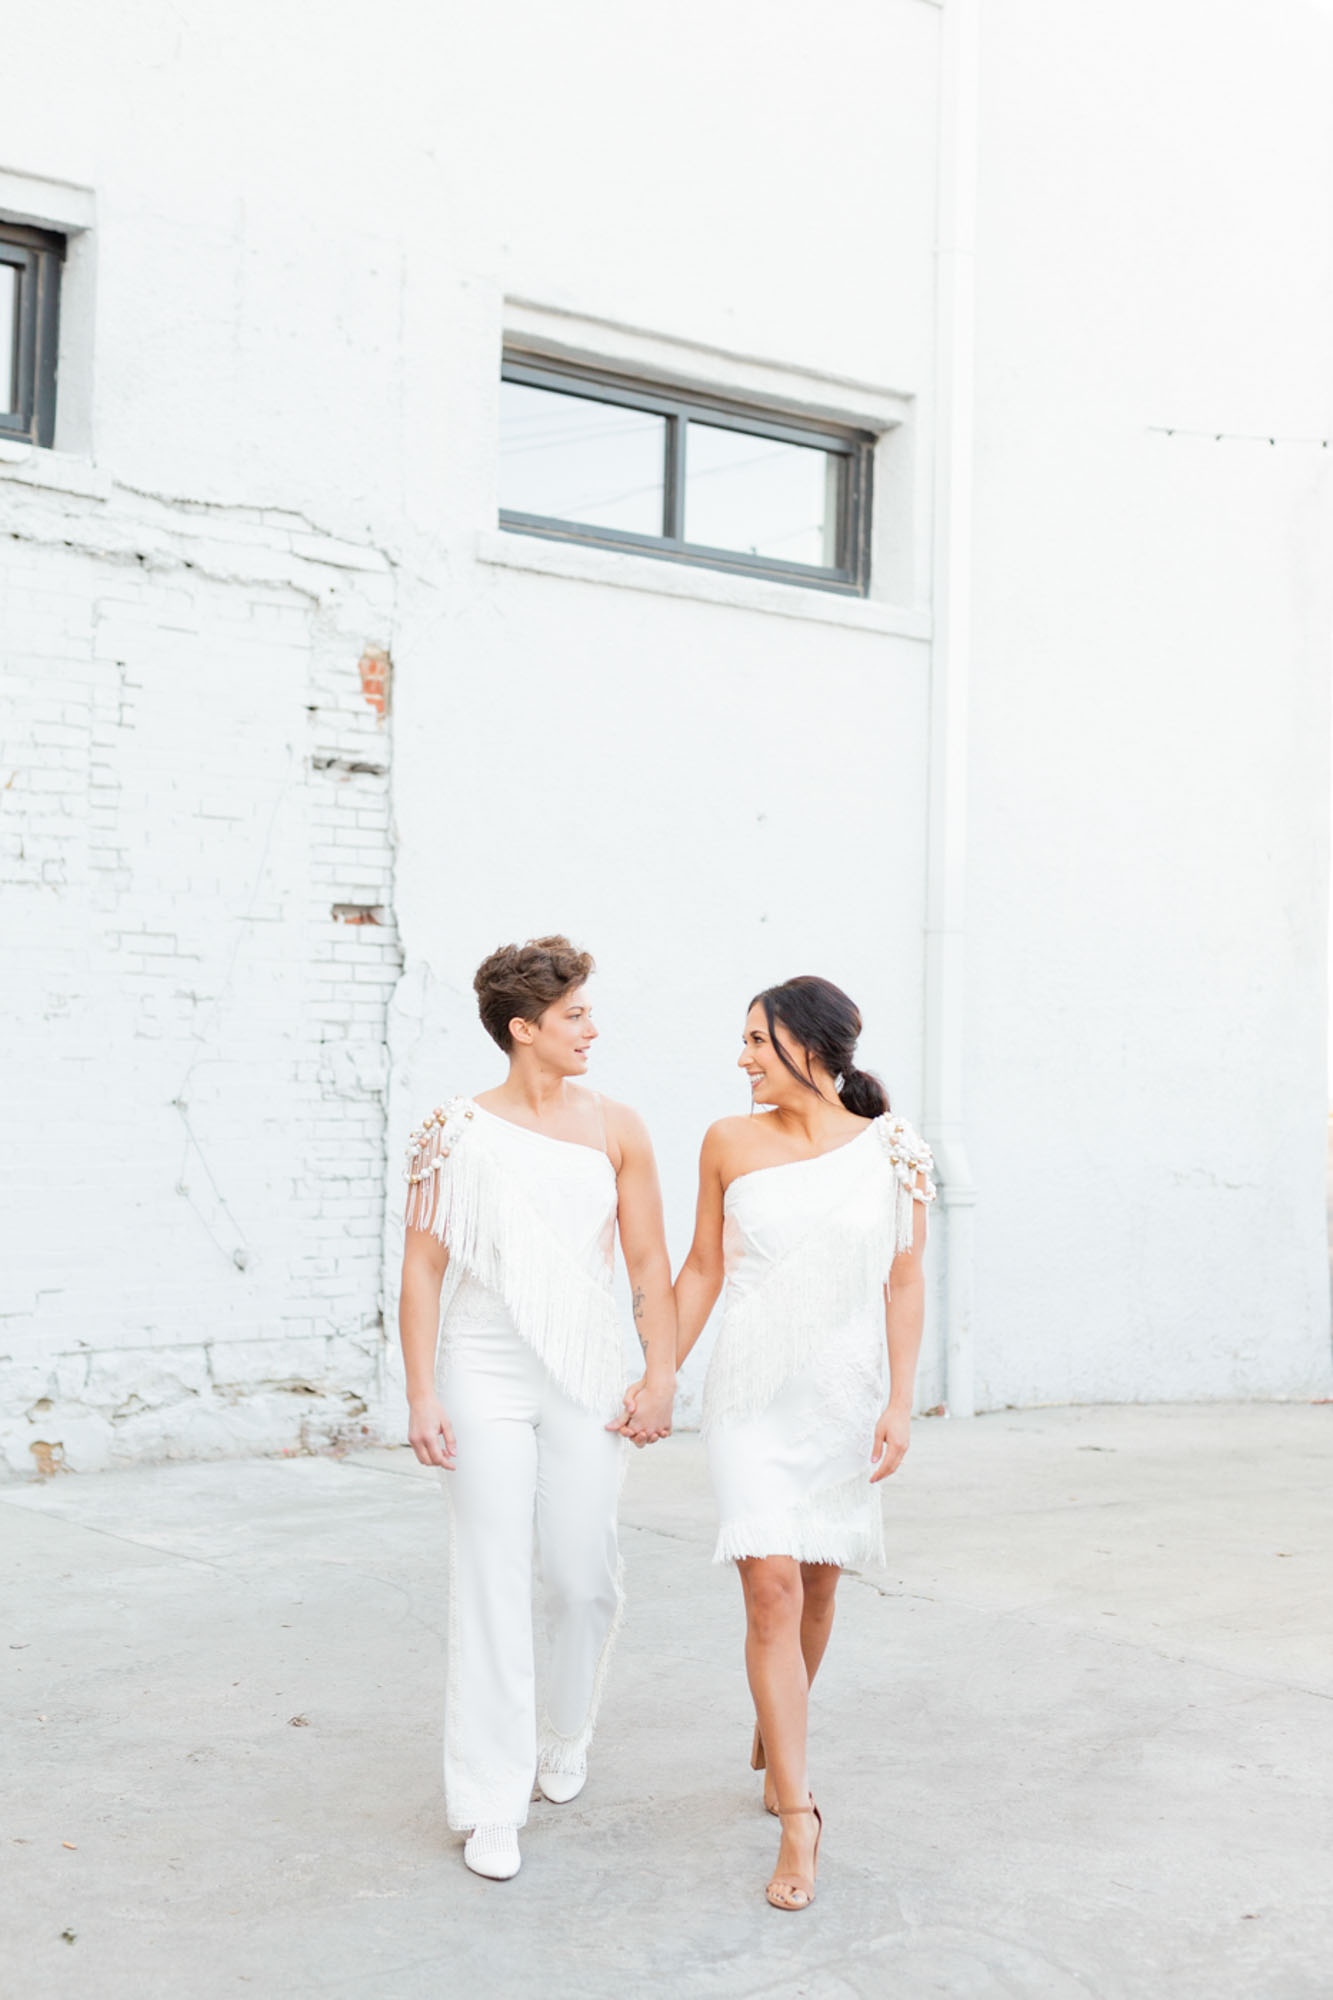 This wedding celebration brought a tropical paradise to Kansas City | Ashley Ice Photography | Featured on Equally Wed, the leading LGBTQ+ wedding magazine